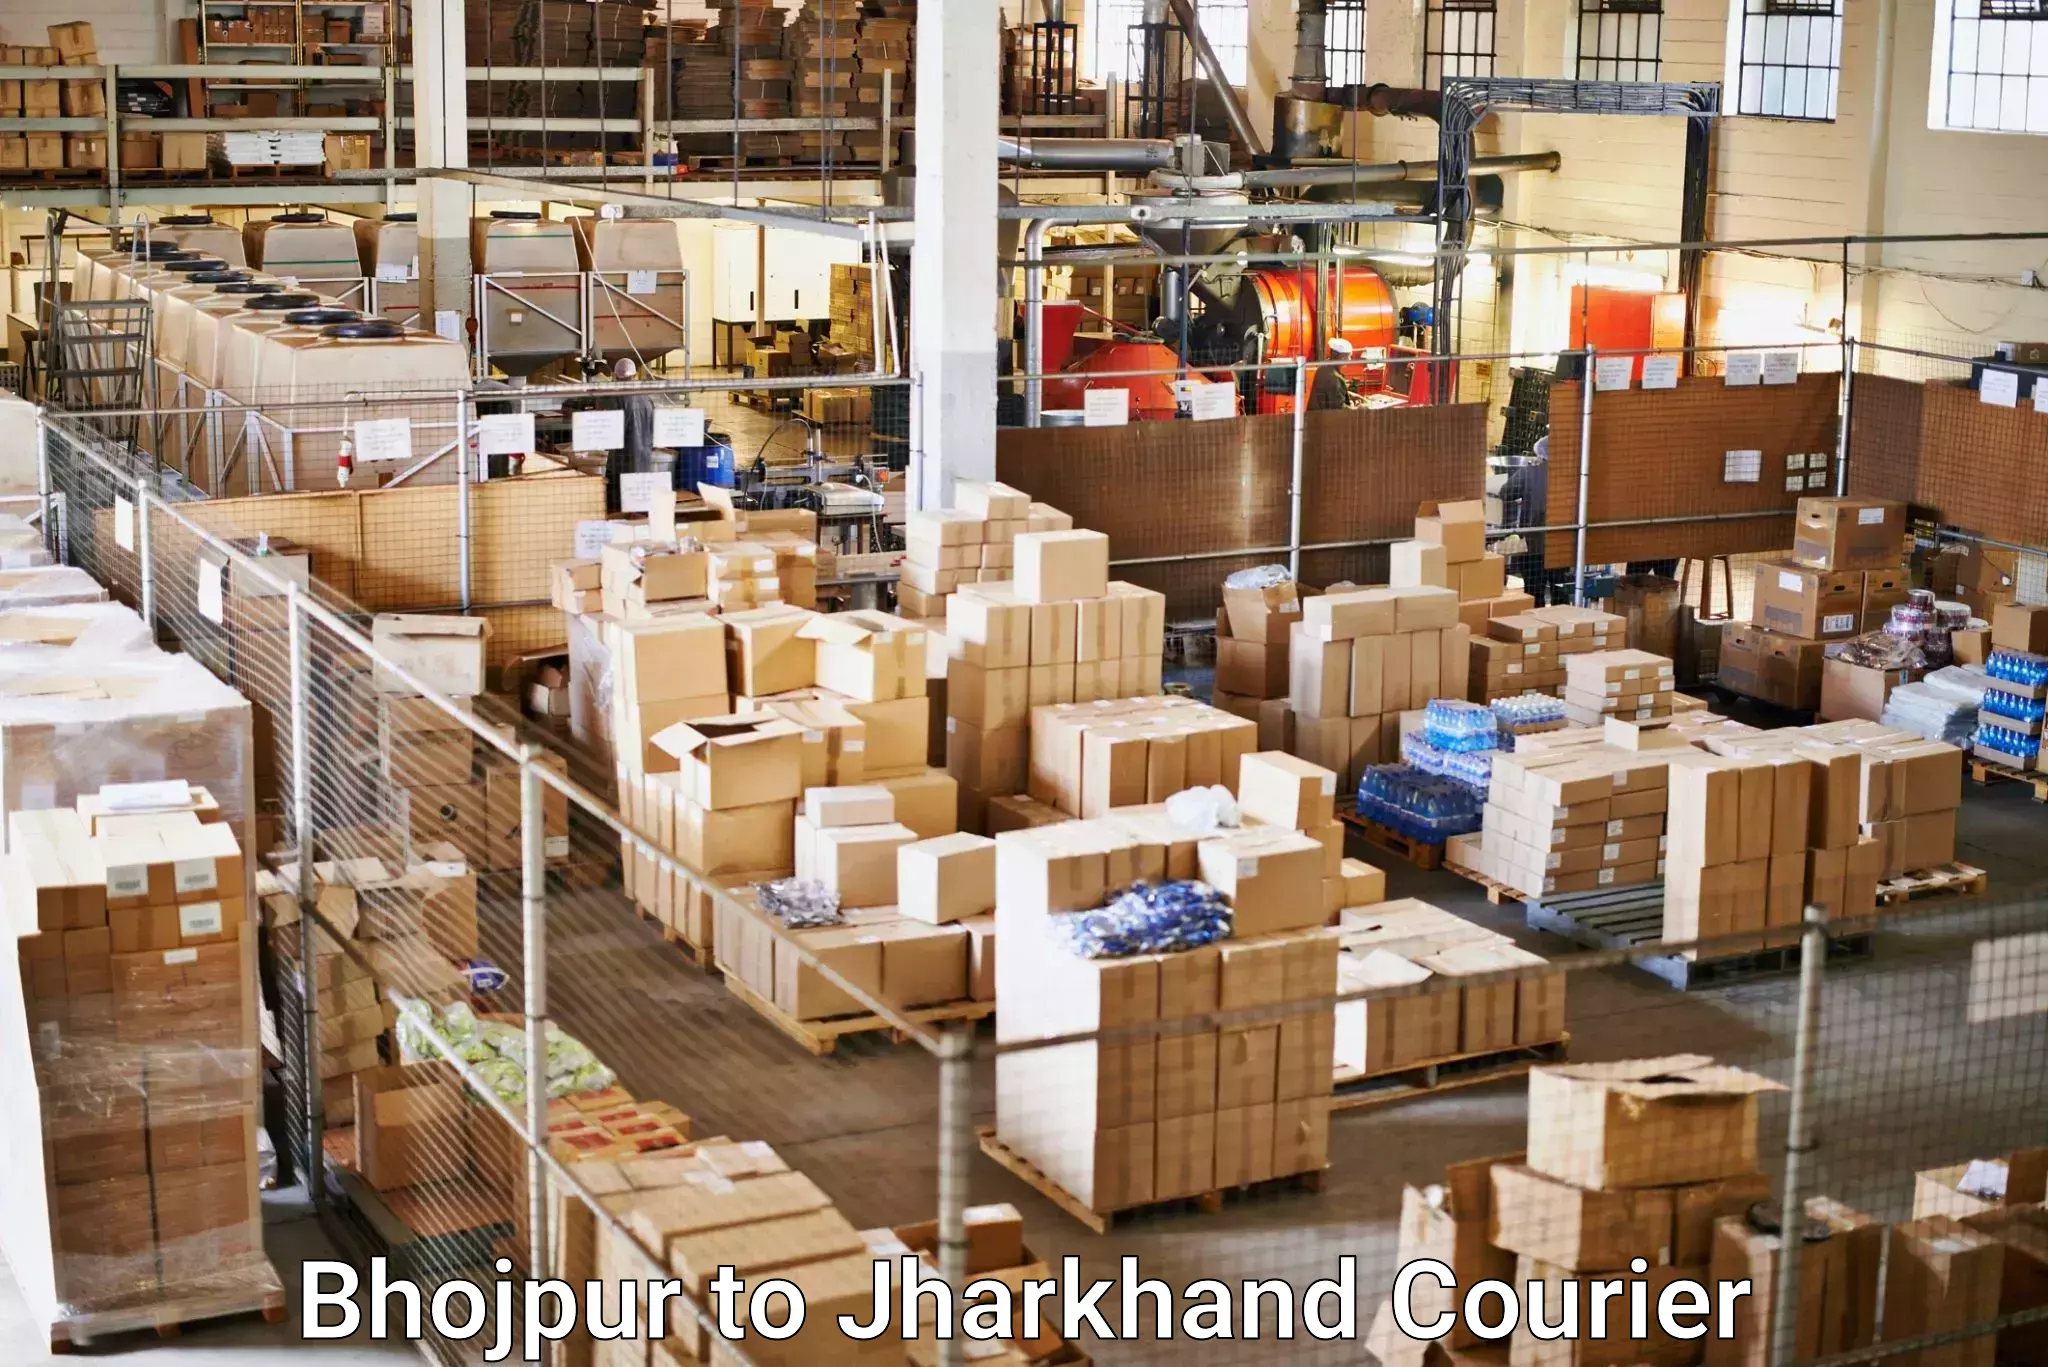 Bulk courier orders Bhojpur to Jharkhand